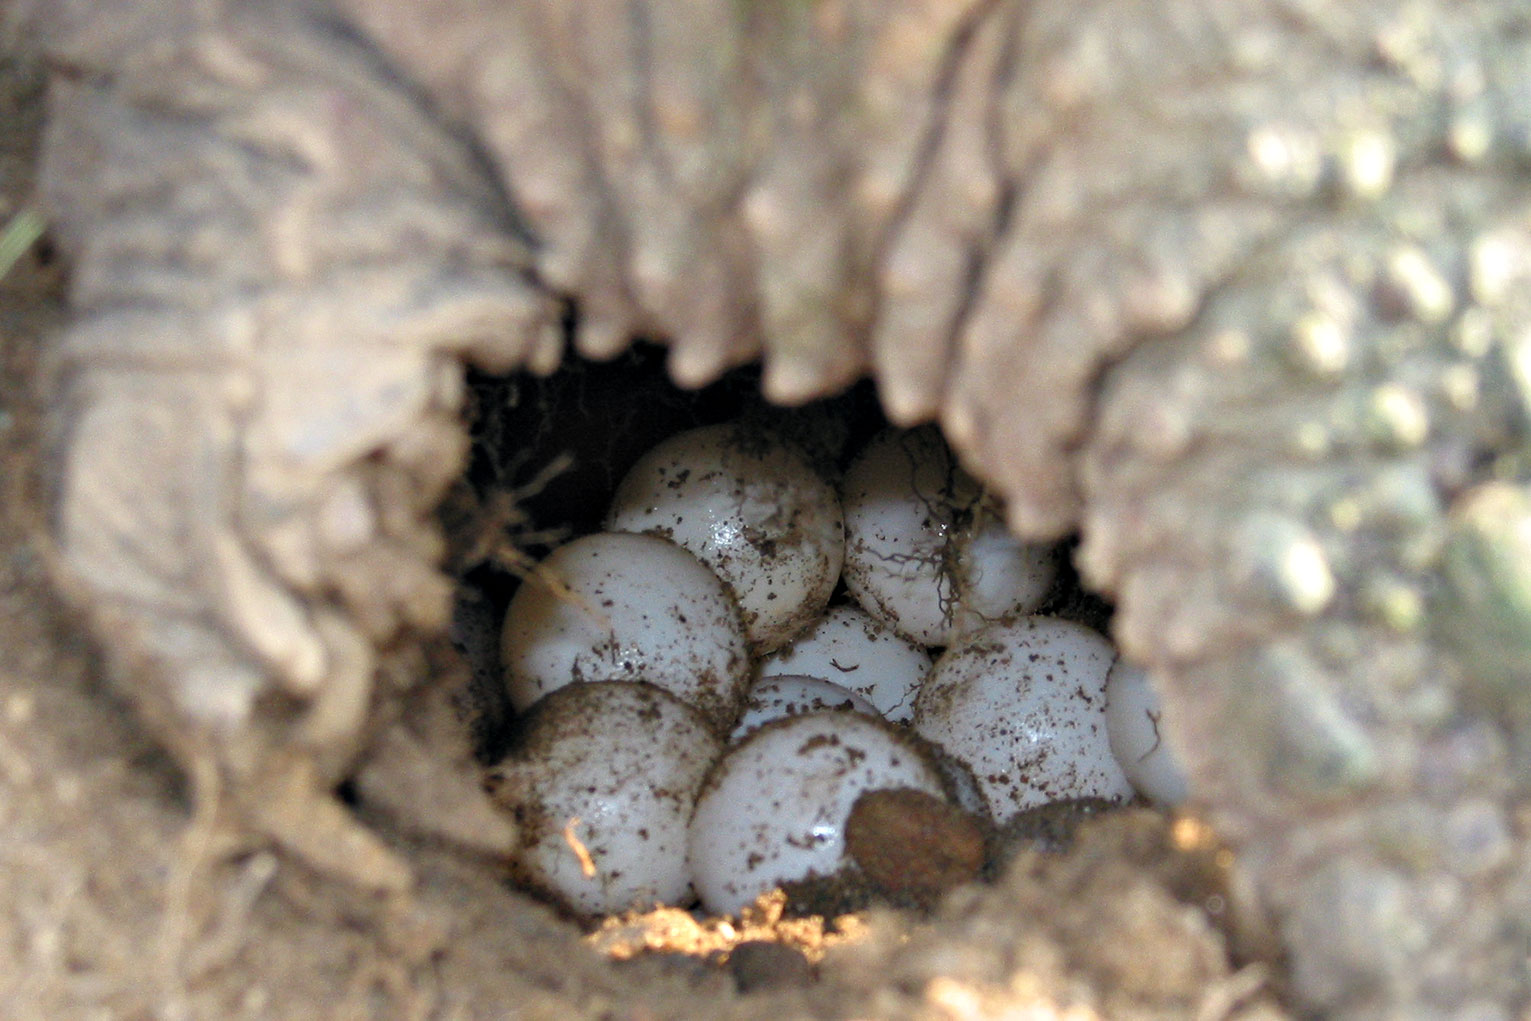 snapping_turtle_eggs_md.jpg